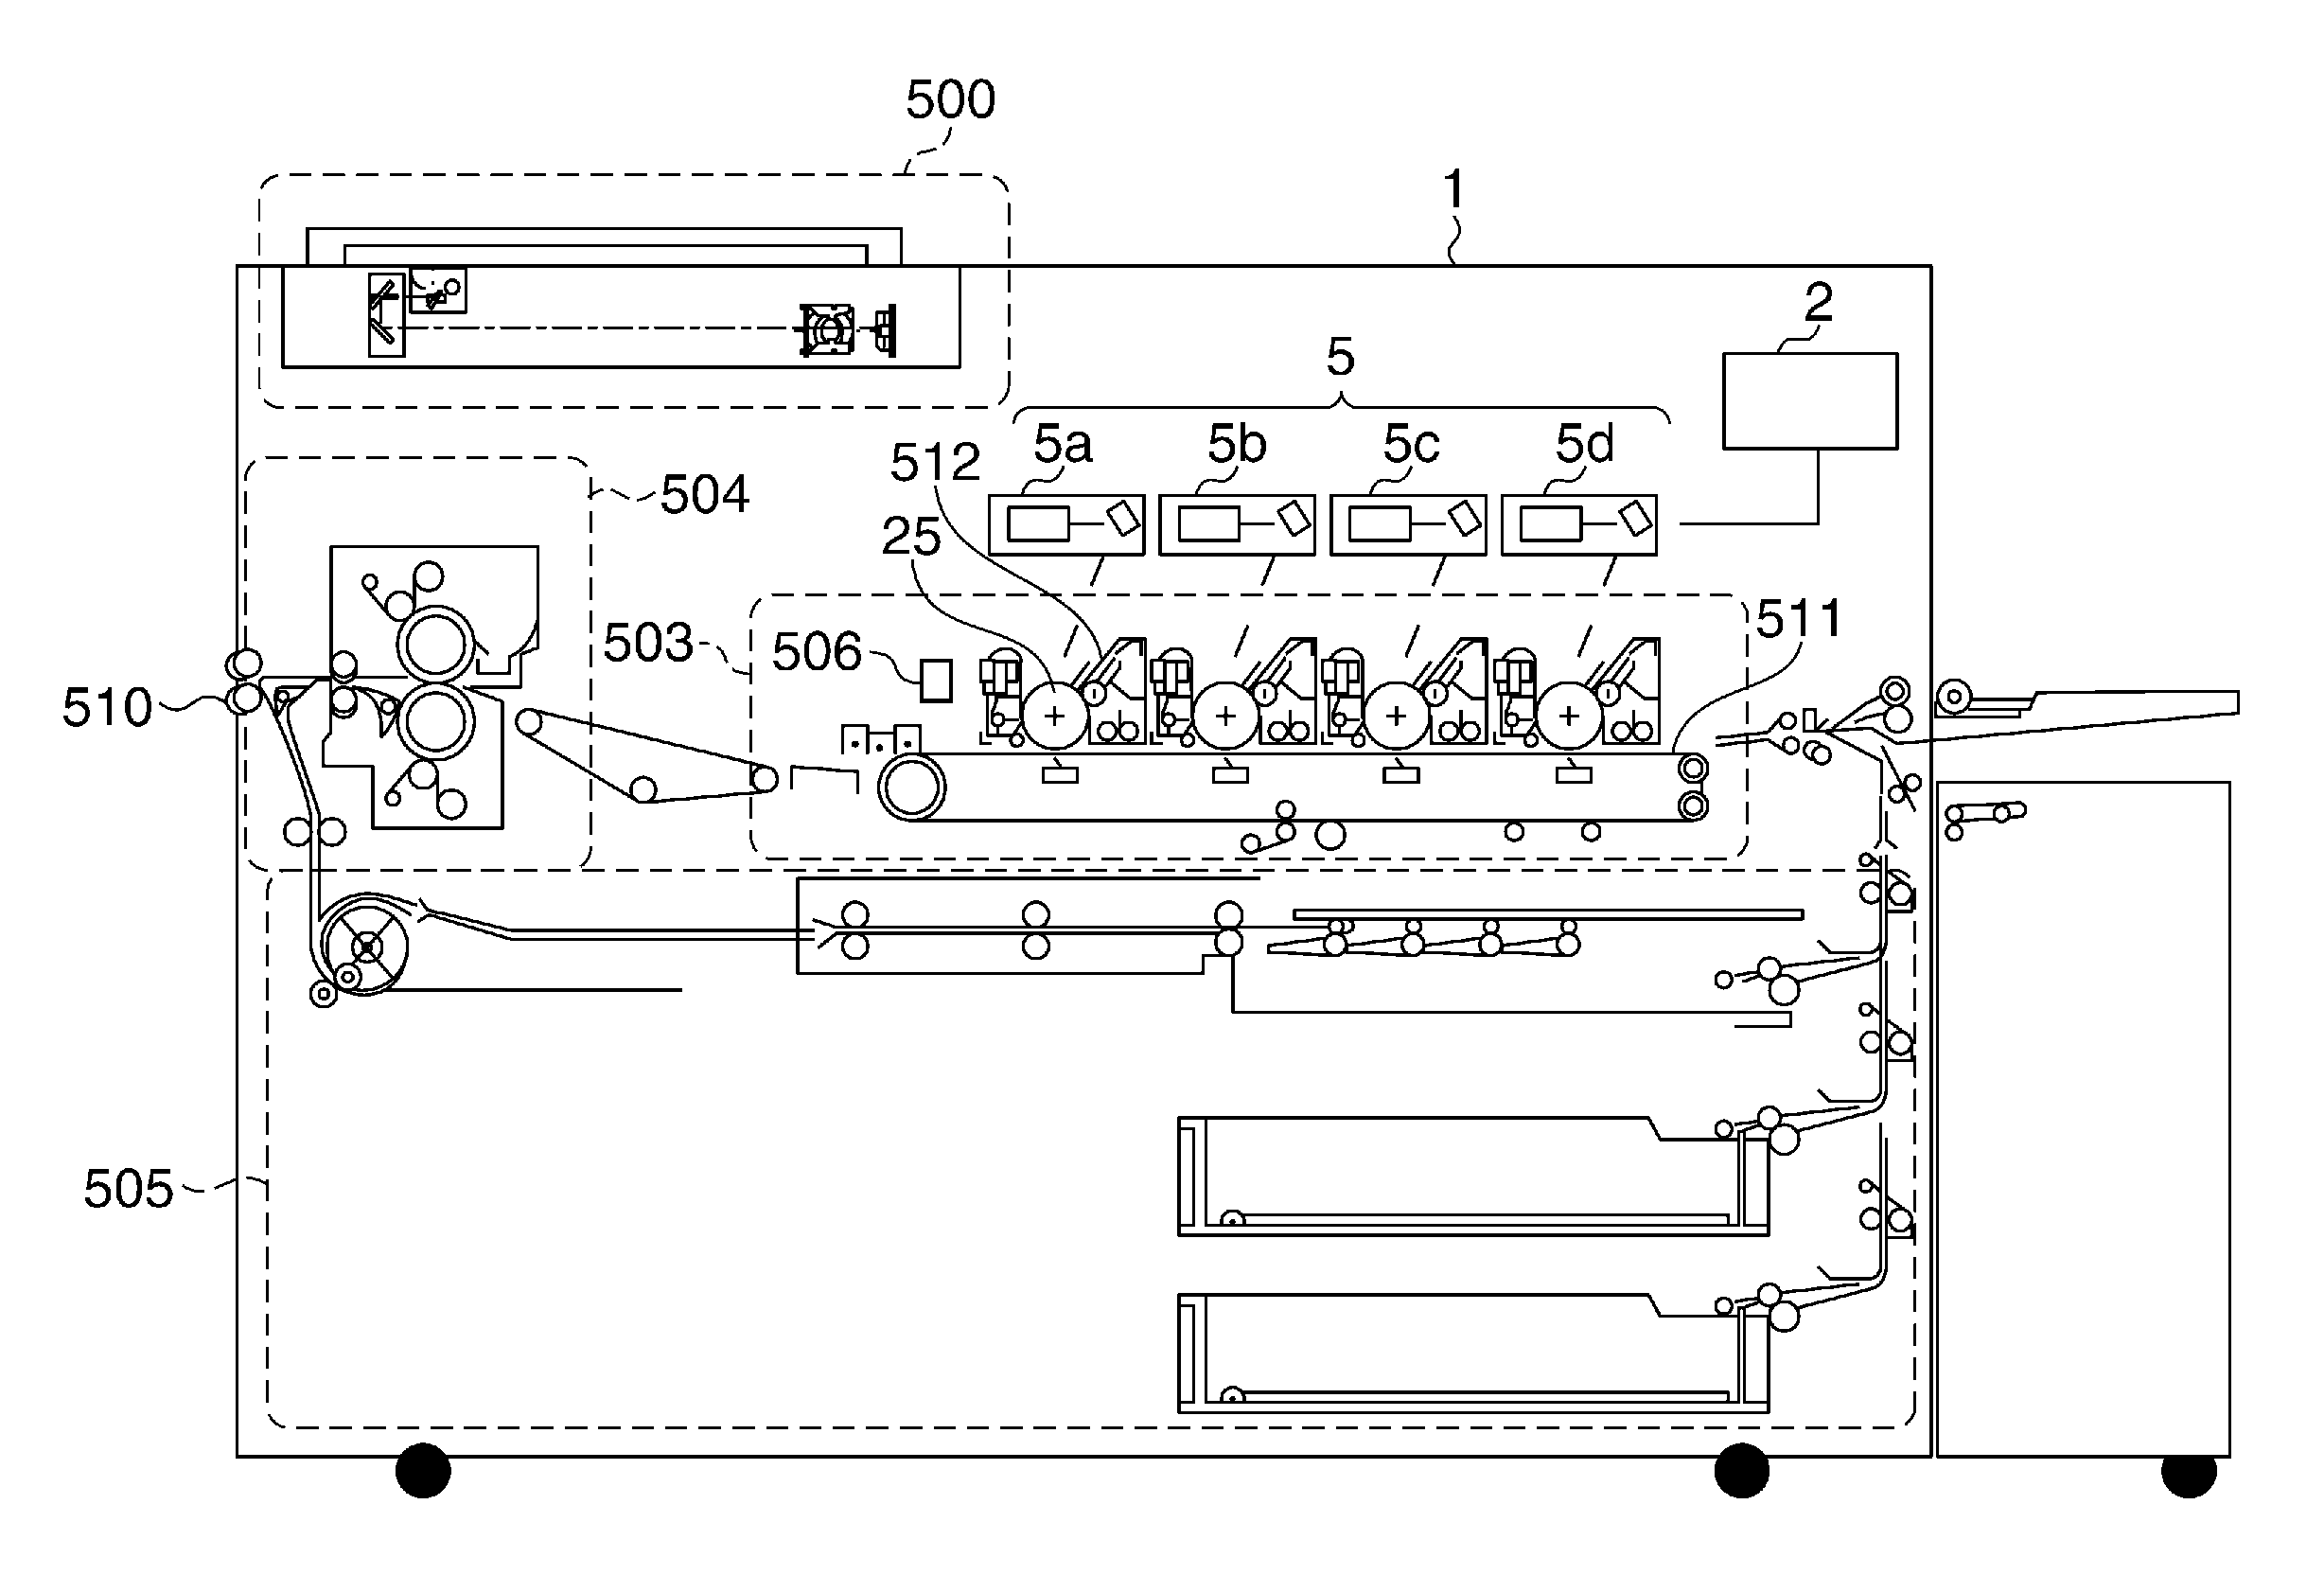 Image forming apparatus of electrophotographic system